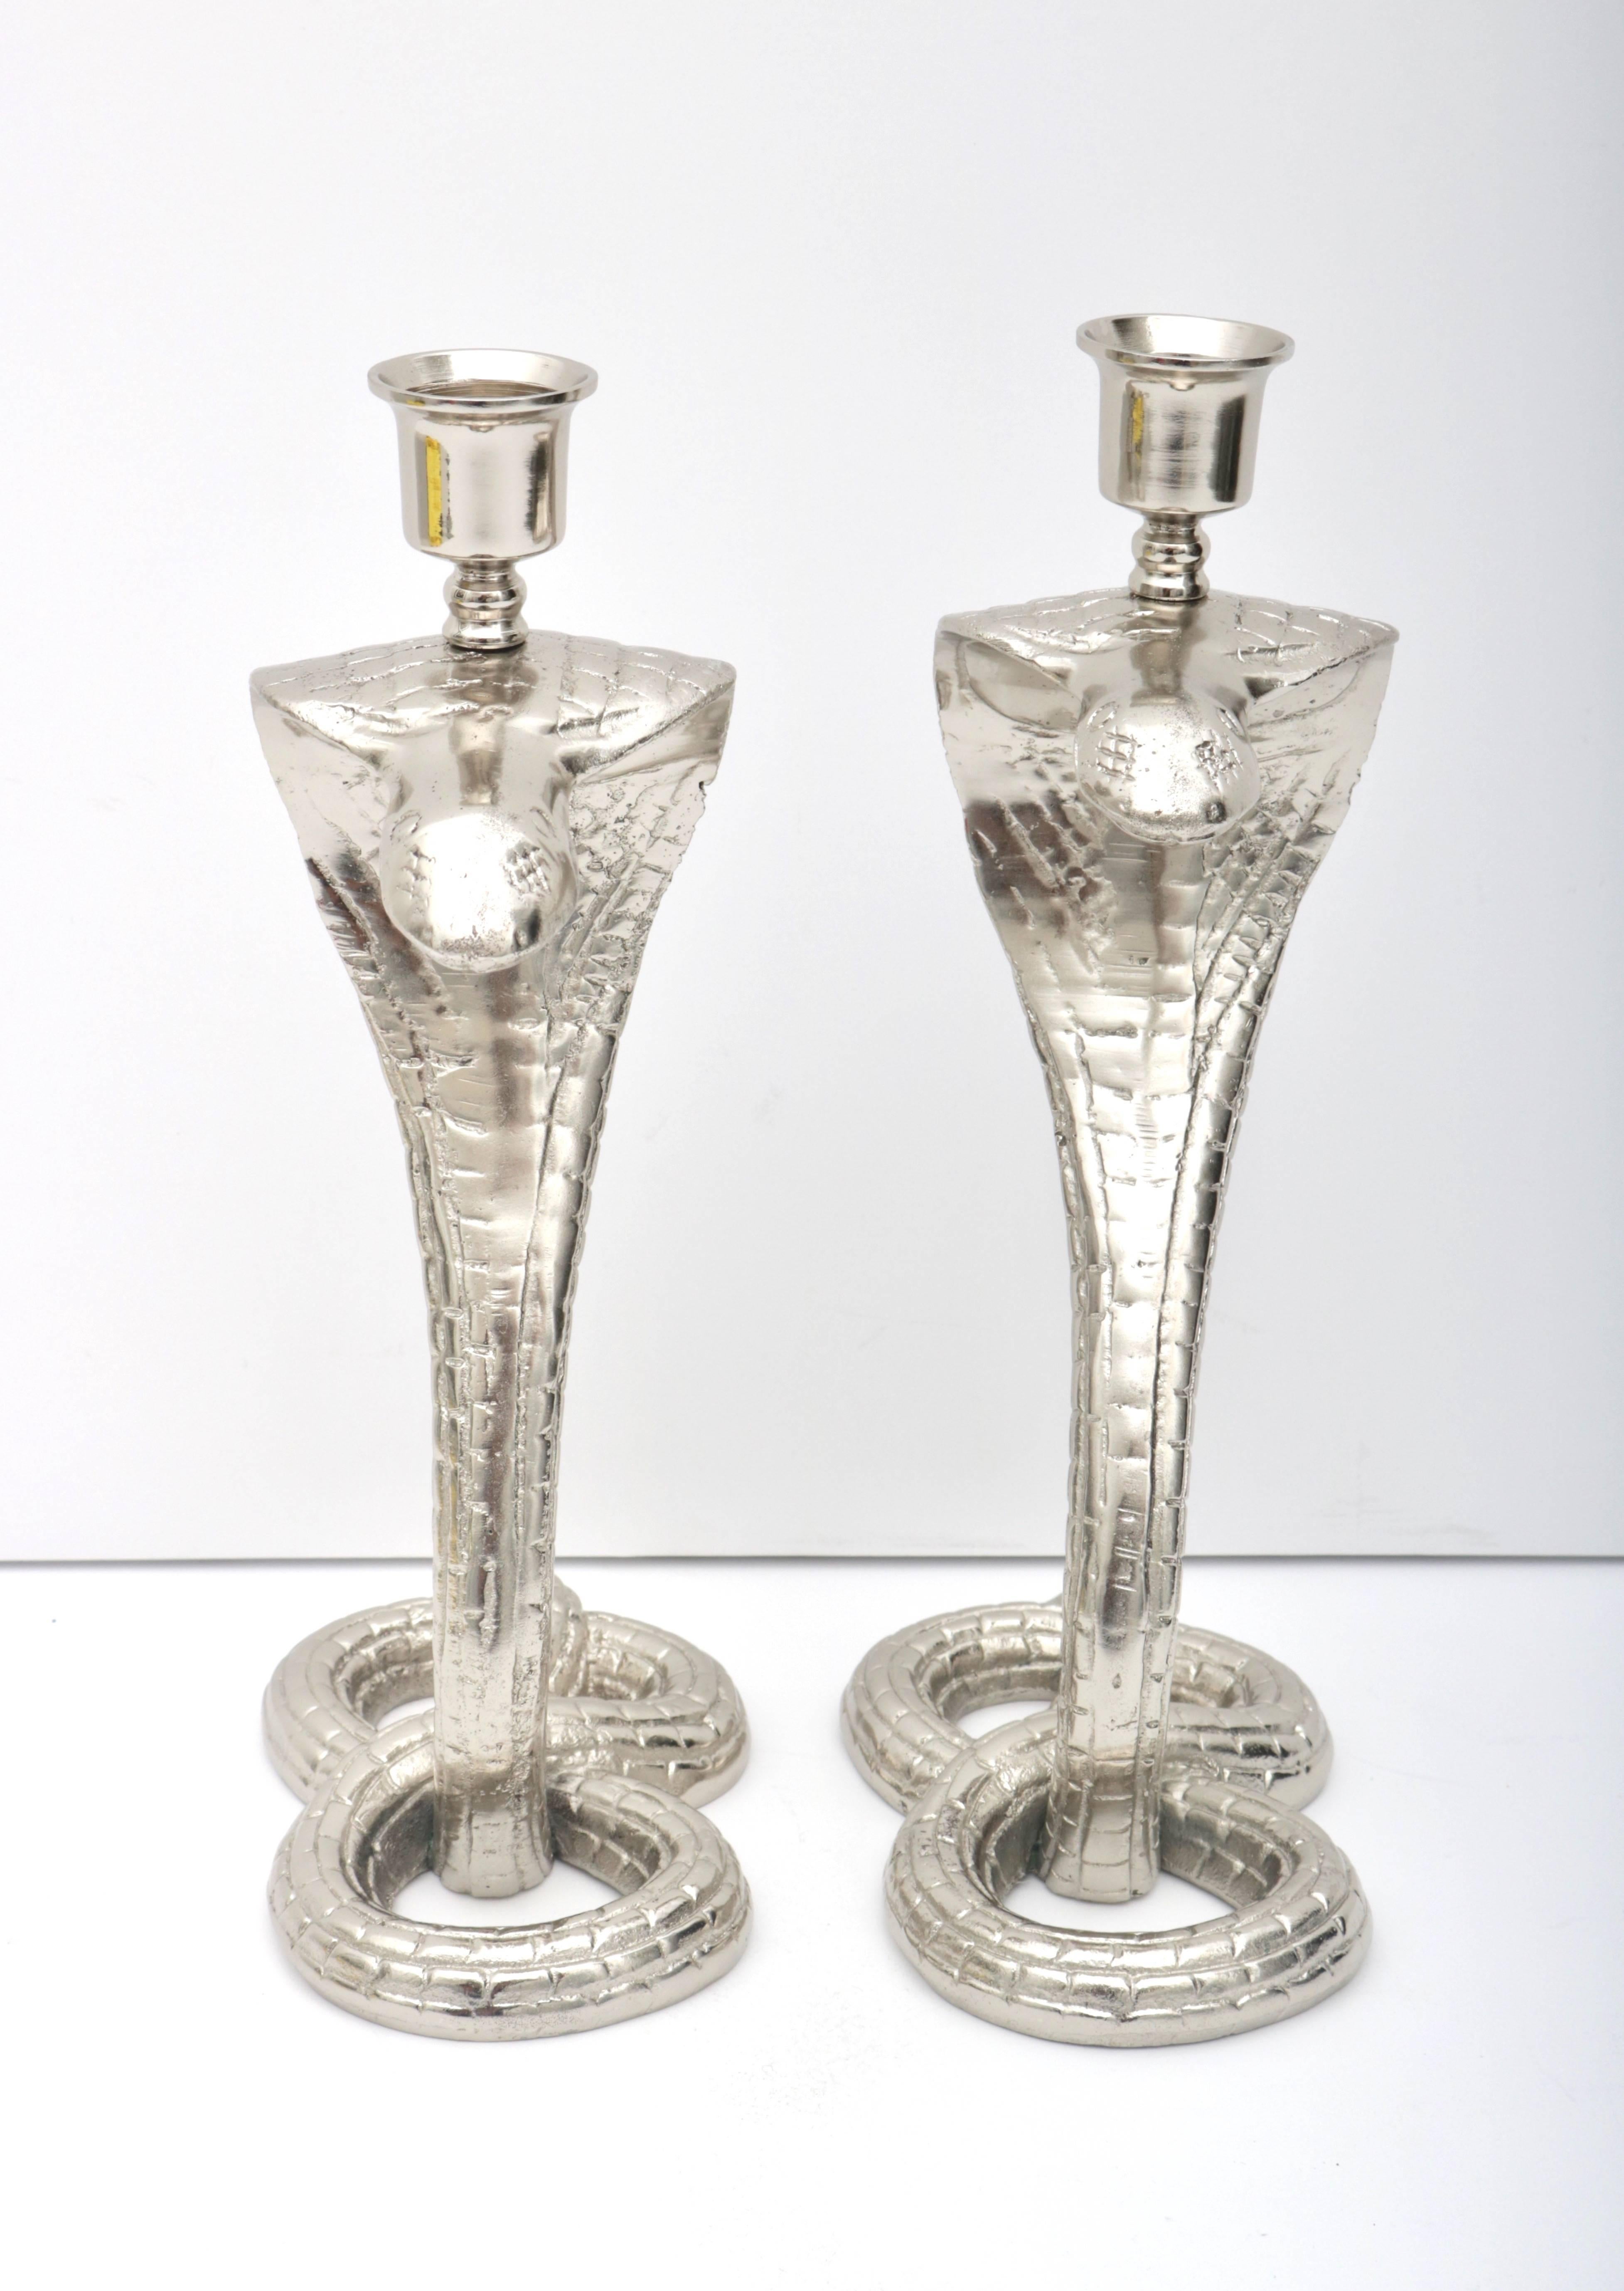 This stylish and exotic pair of cobra-form candle sticks date from the 1920s during the height of the Tutankhamun discoveries in Egypt. They are fabricated in solid bronze and have recently been professionally nickel-plated and lacquered.

